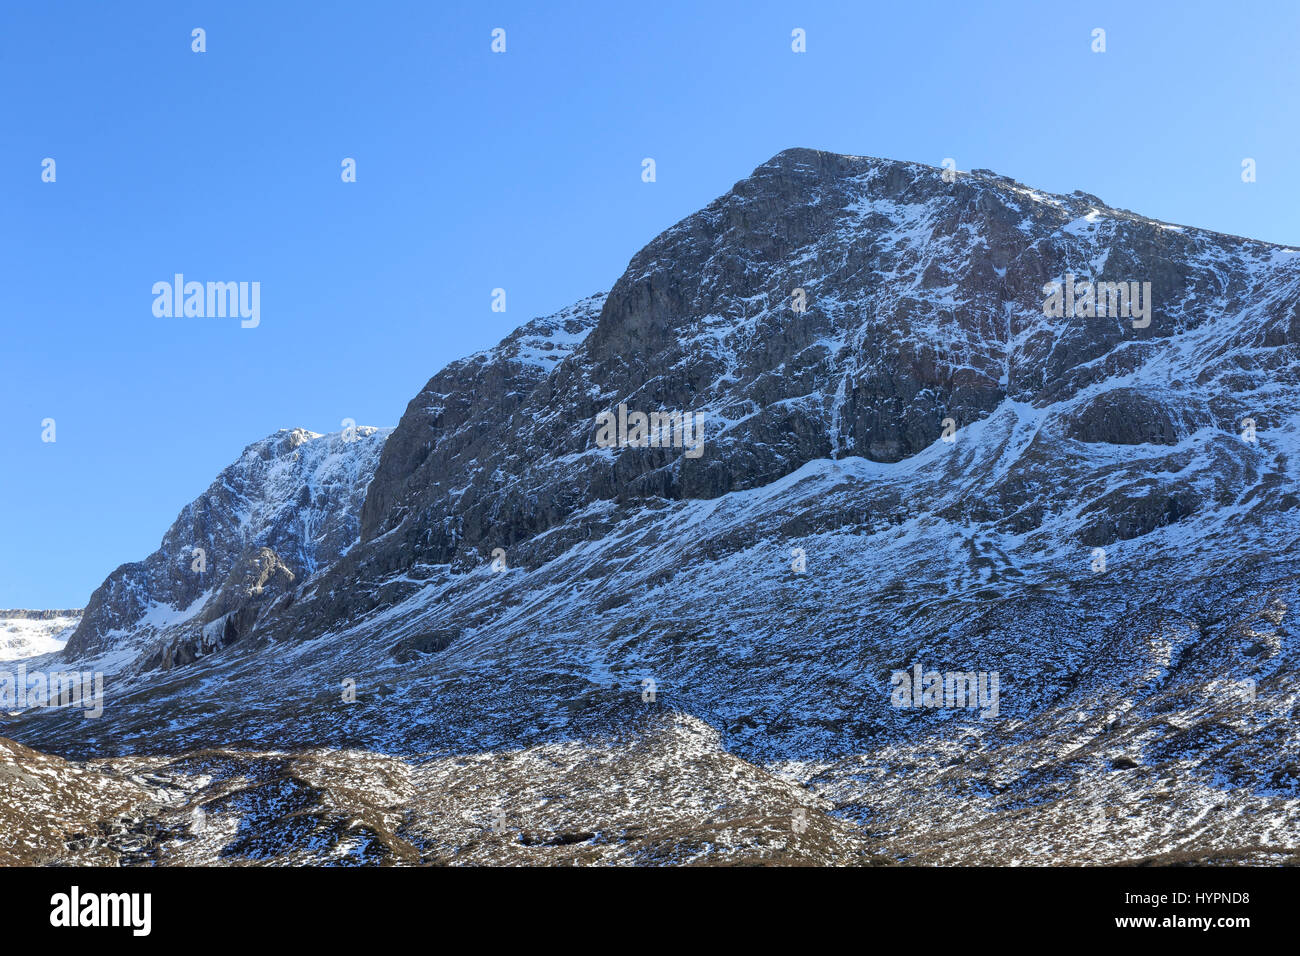 View of the North Face of Ben Nevis in Scotland Stock Photo